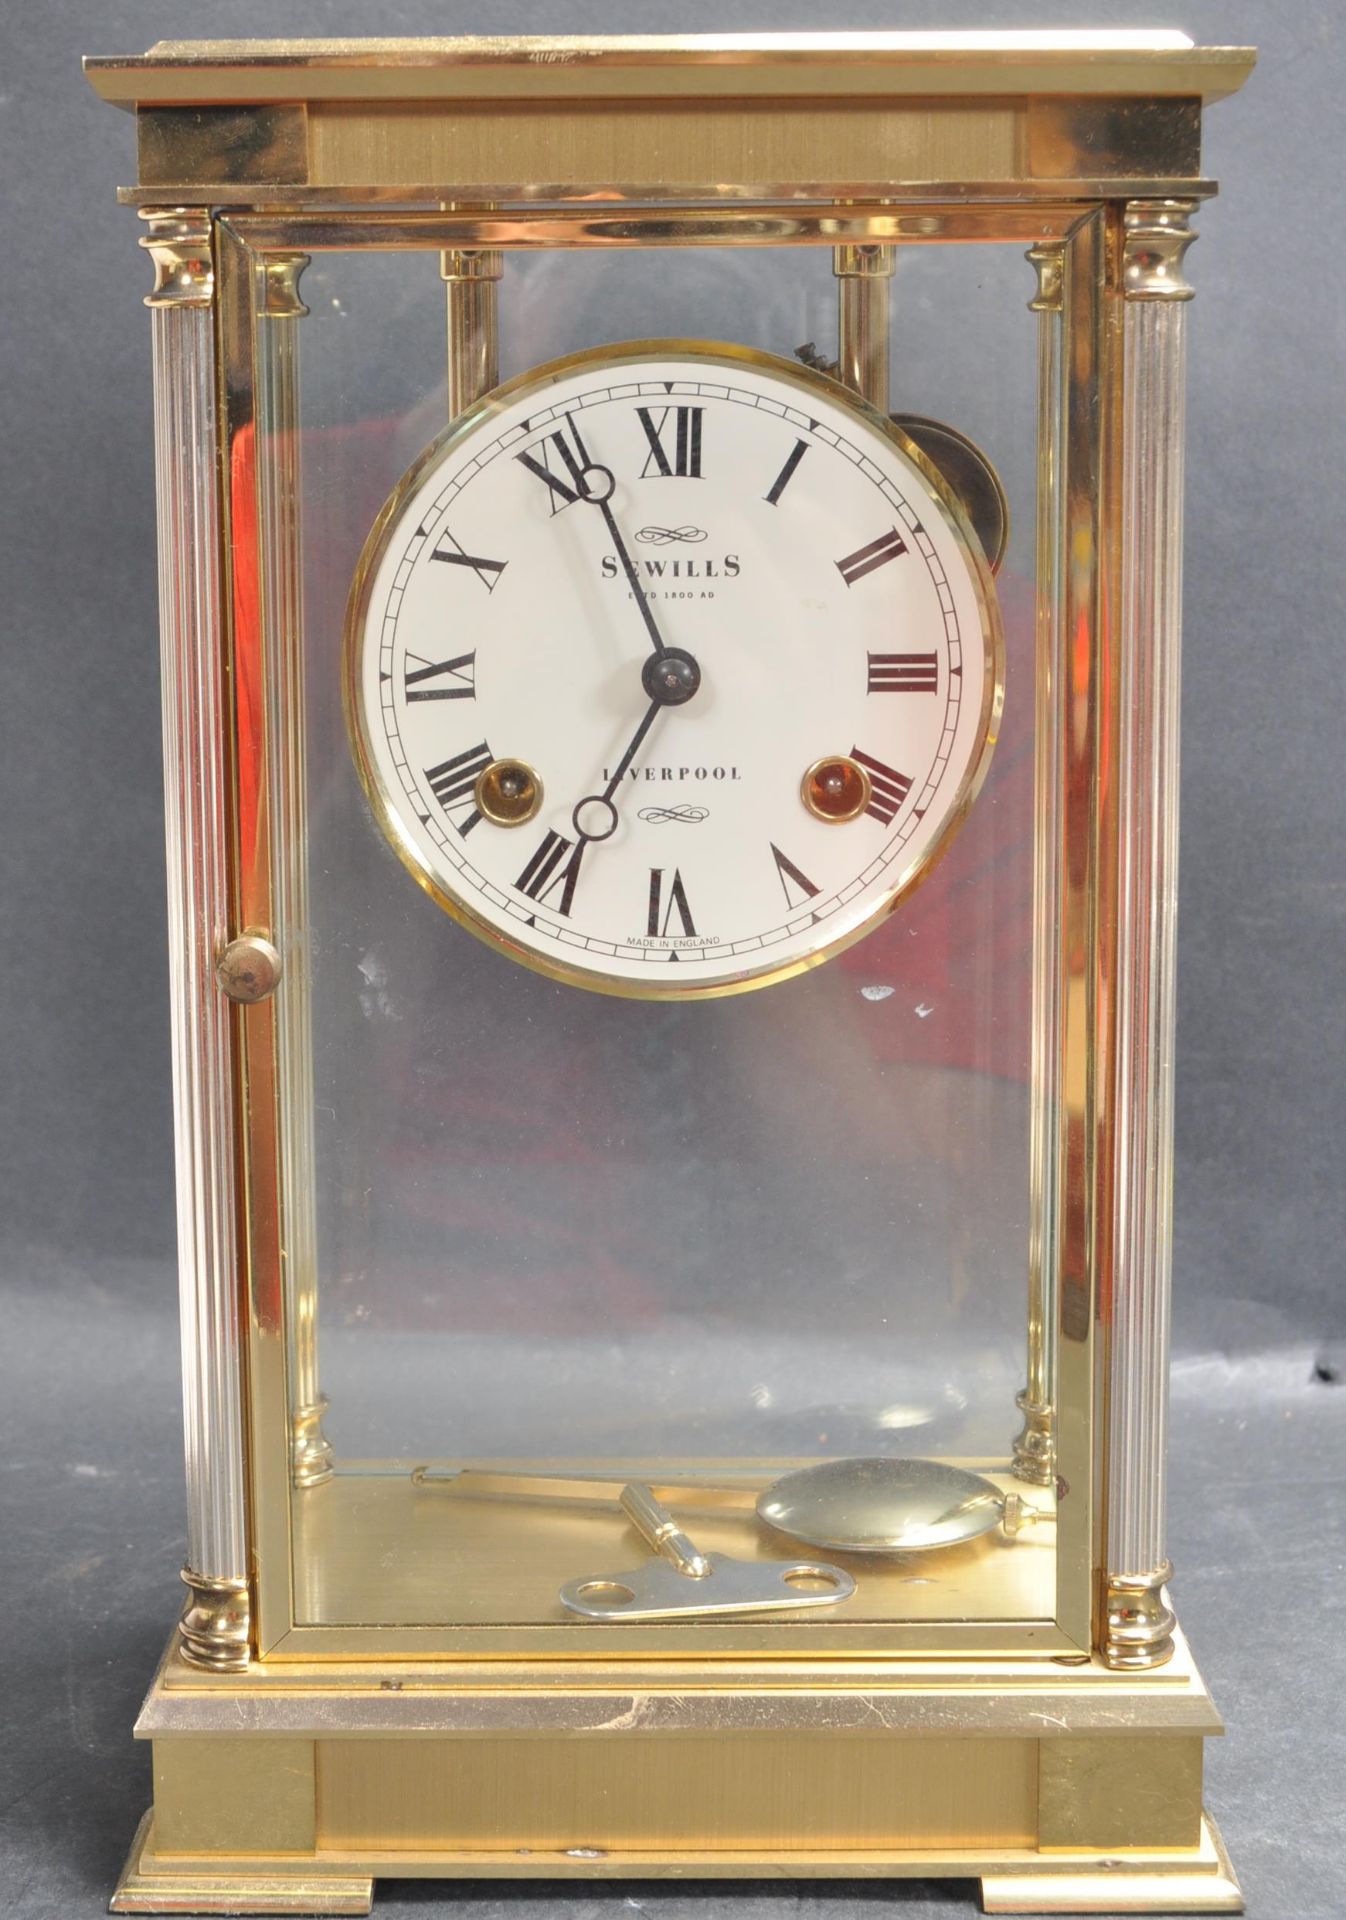 LARGE 20TH CENTURY SEWILLS BRASS CARRIAGE CLOCK.